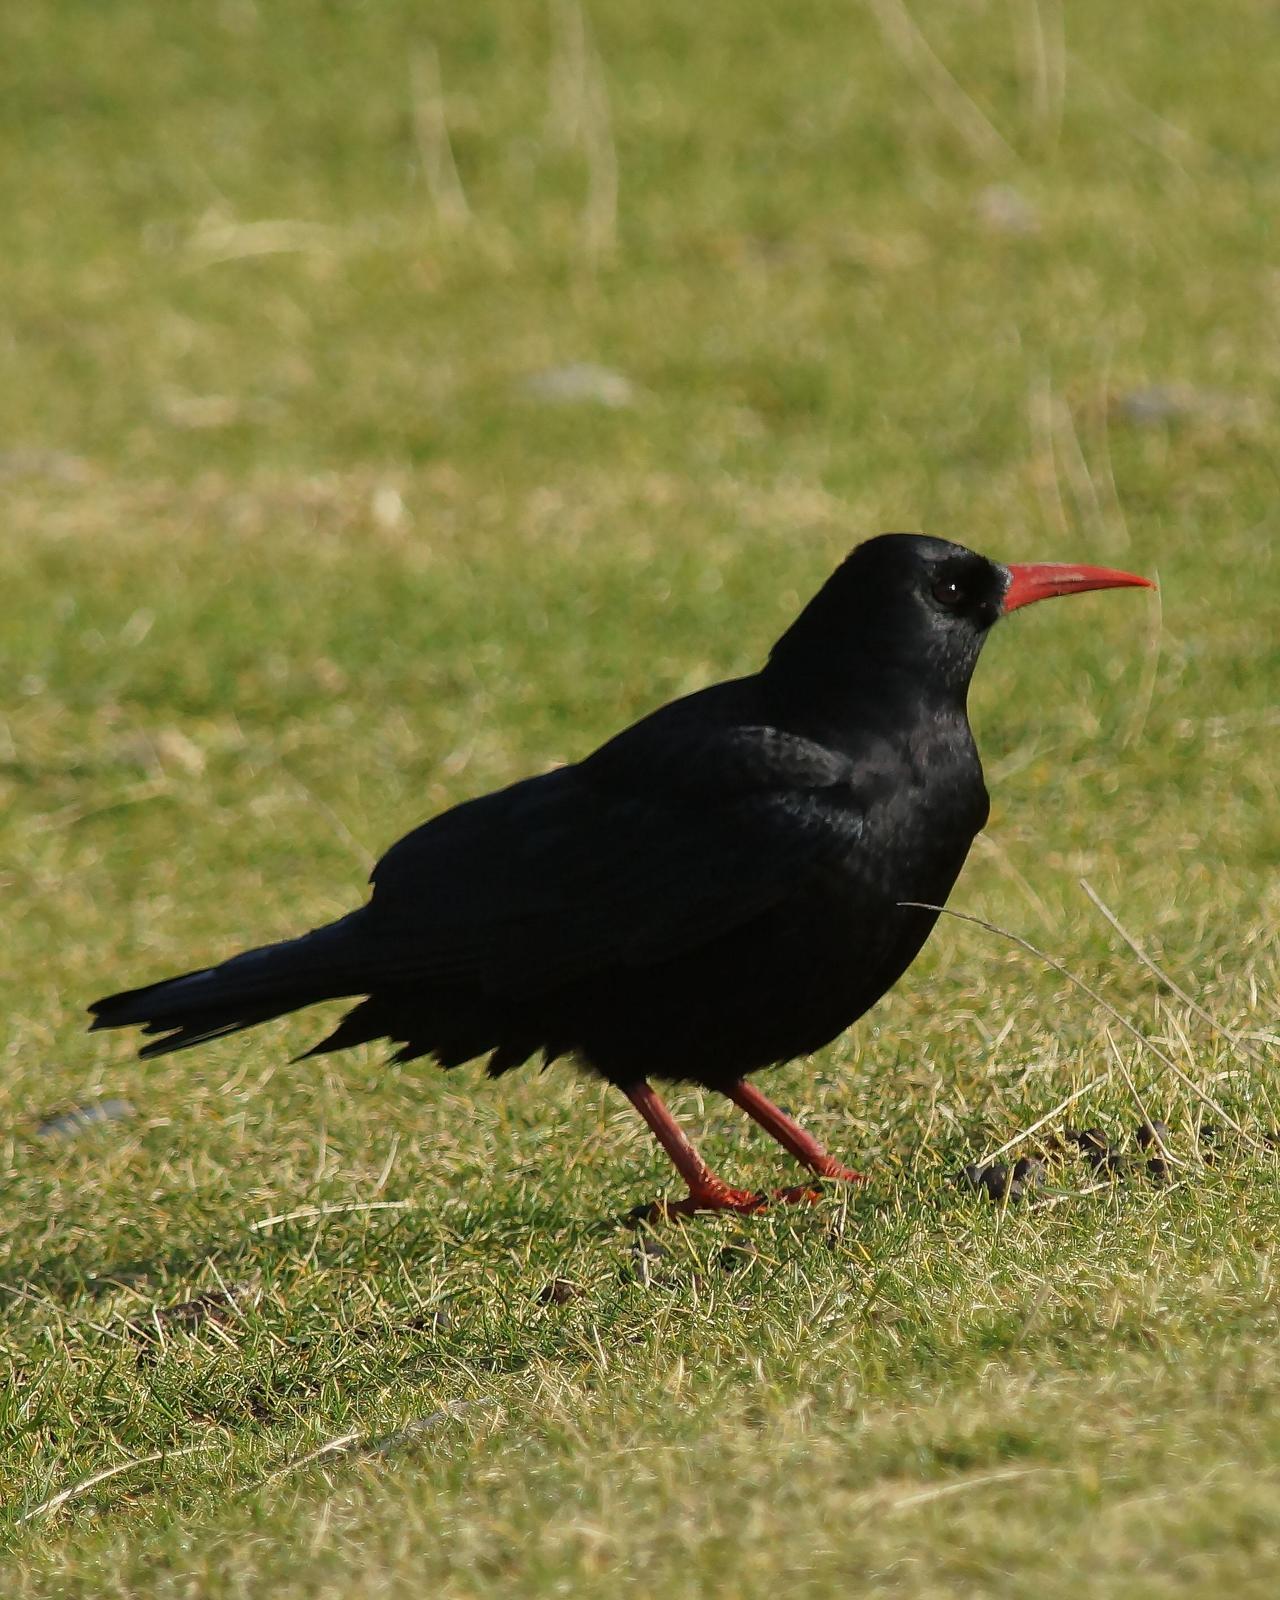 Red-billed Chough Photo by Steve Percival